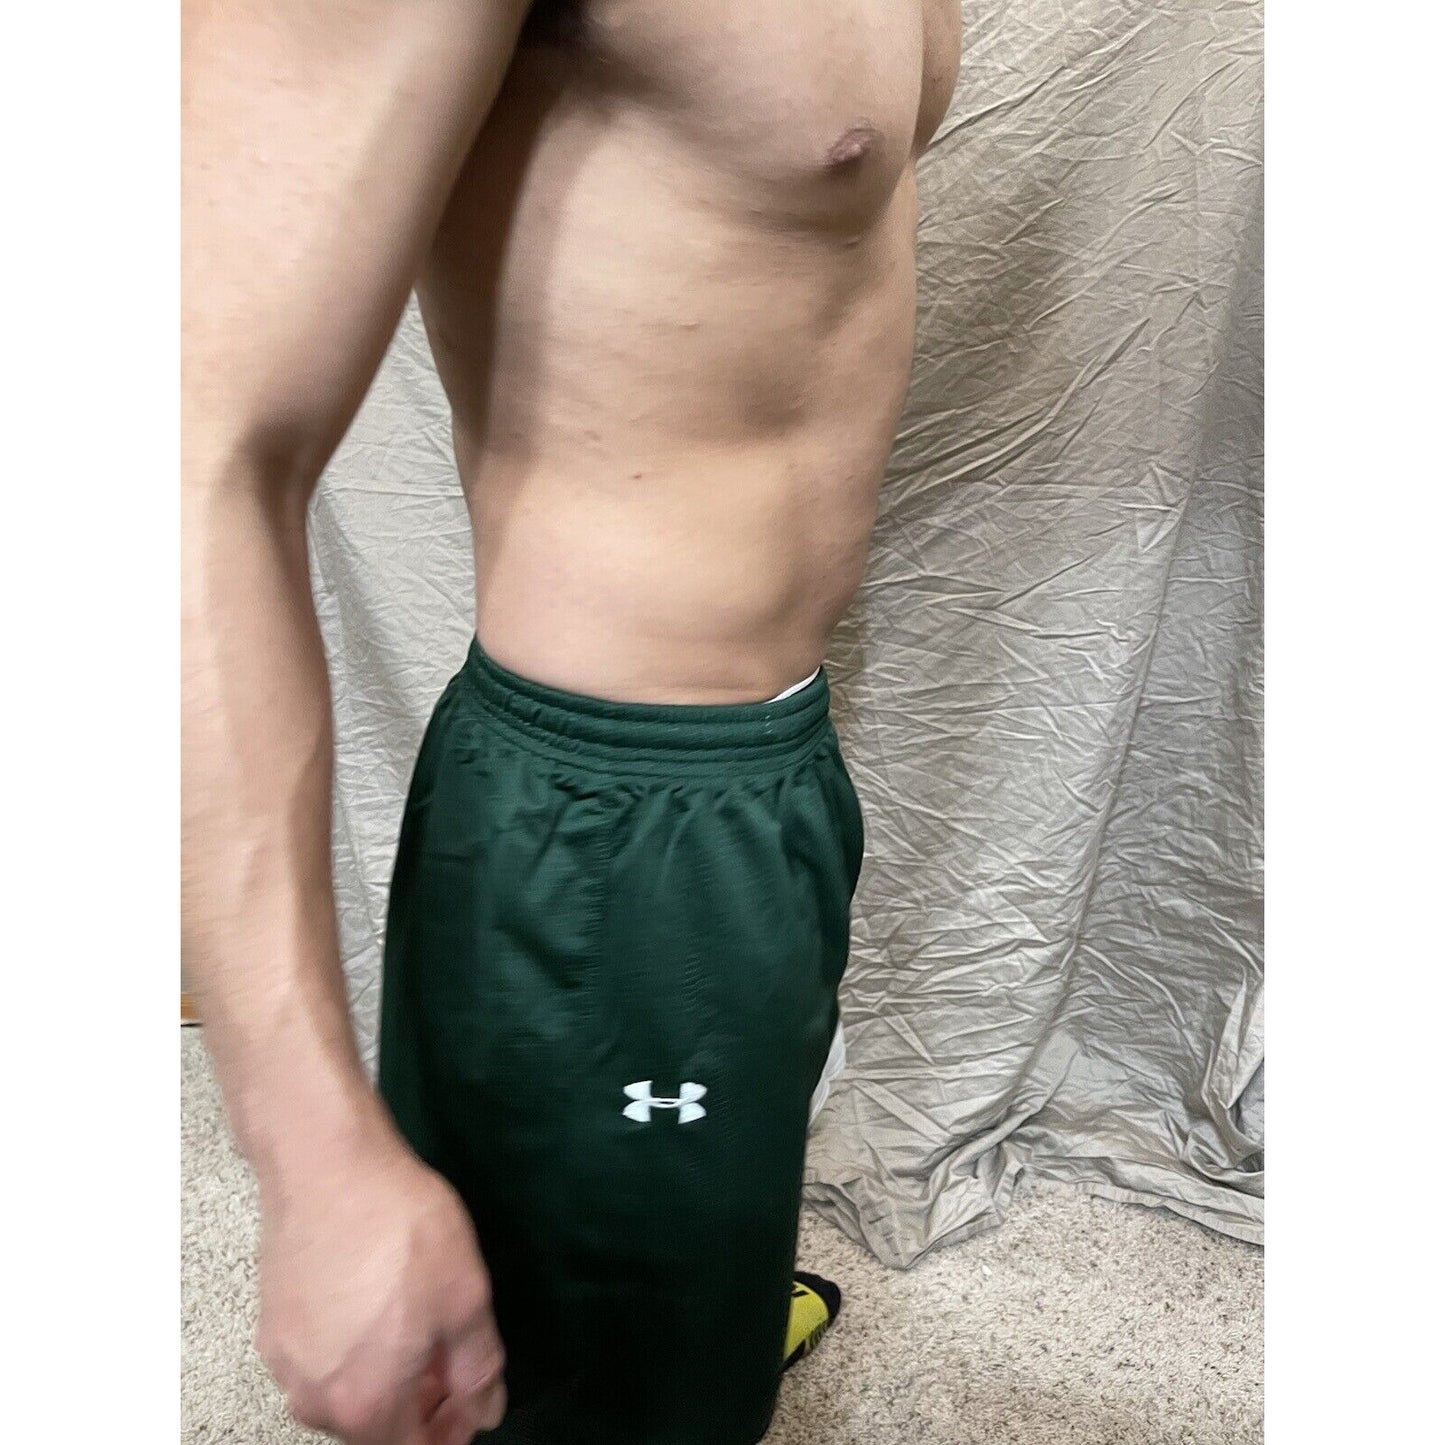 Boy's under armour Youth XL Deep Green Lacrosse style shorts no pockets